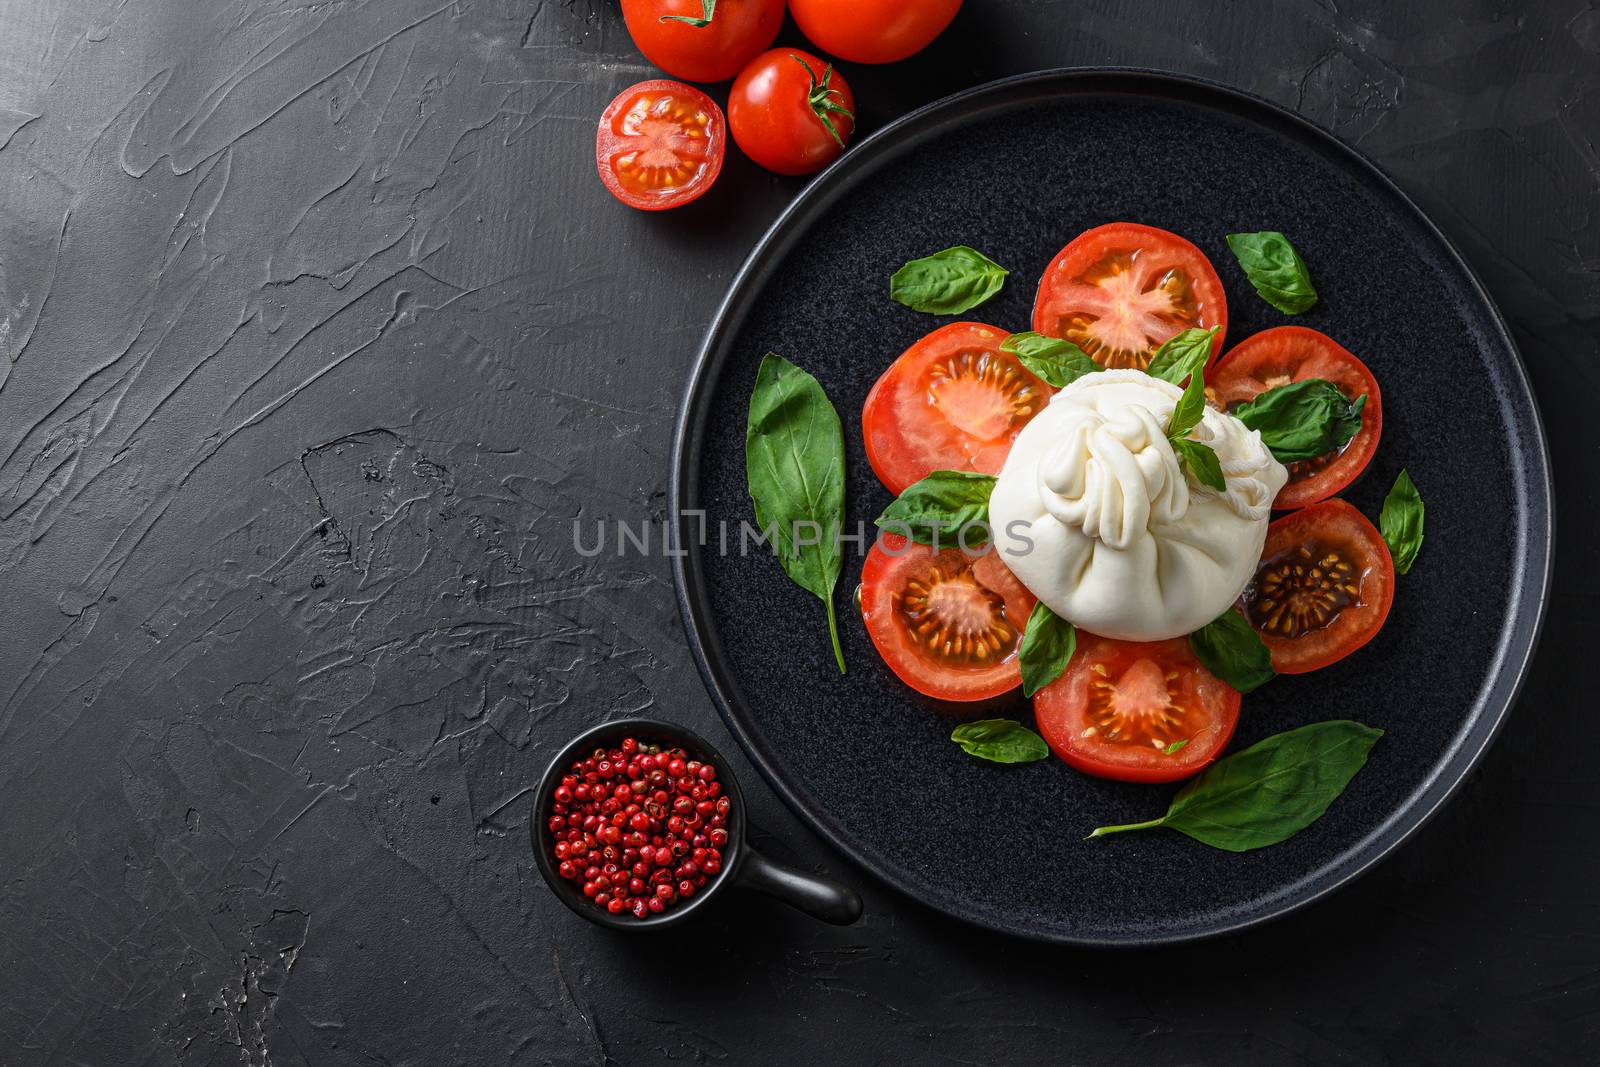 Burrata, Italian fresh cheese made from cream and milk of buffalo or cow. on black plate over black stone surface top view space for text